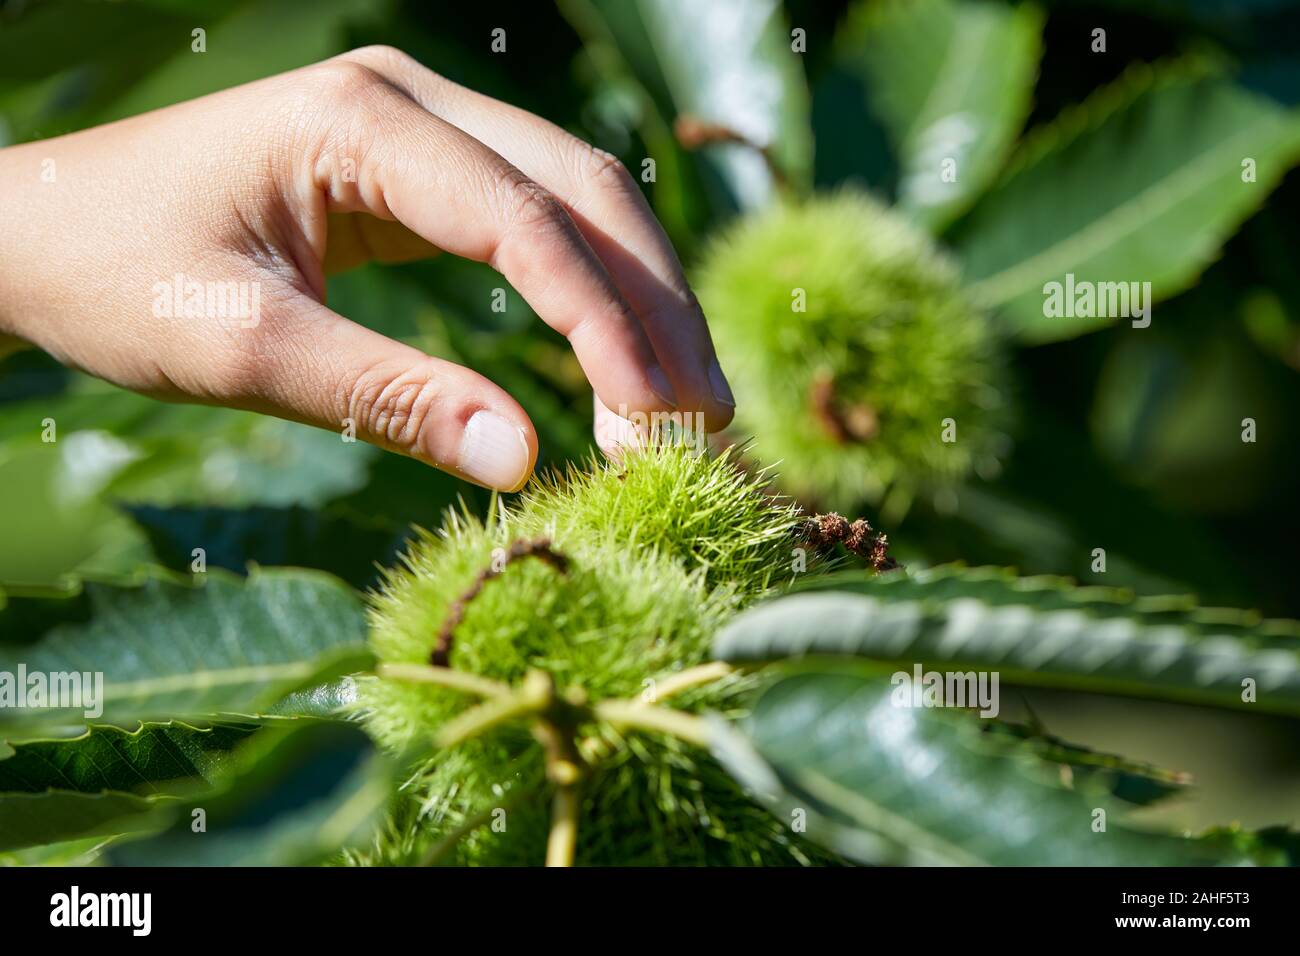 Hand touching a spiny green chestnut cupule on a branch Stock Photo